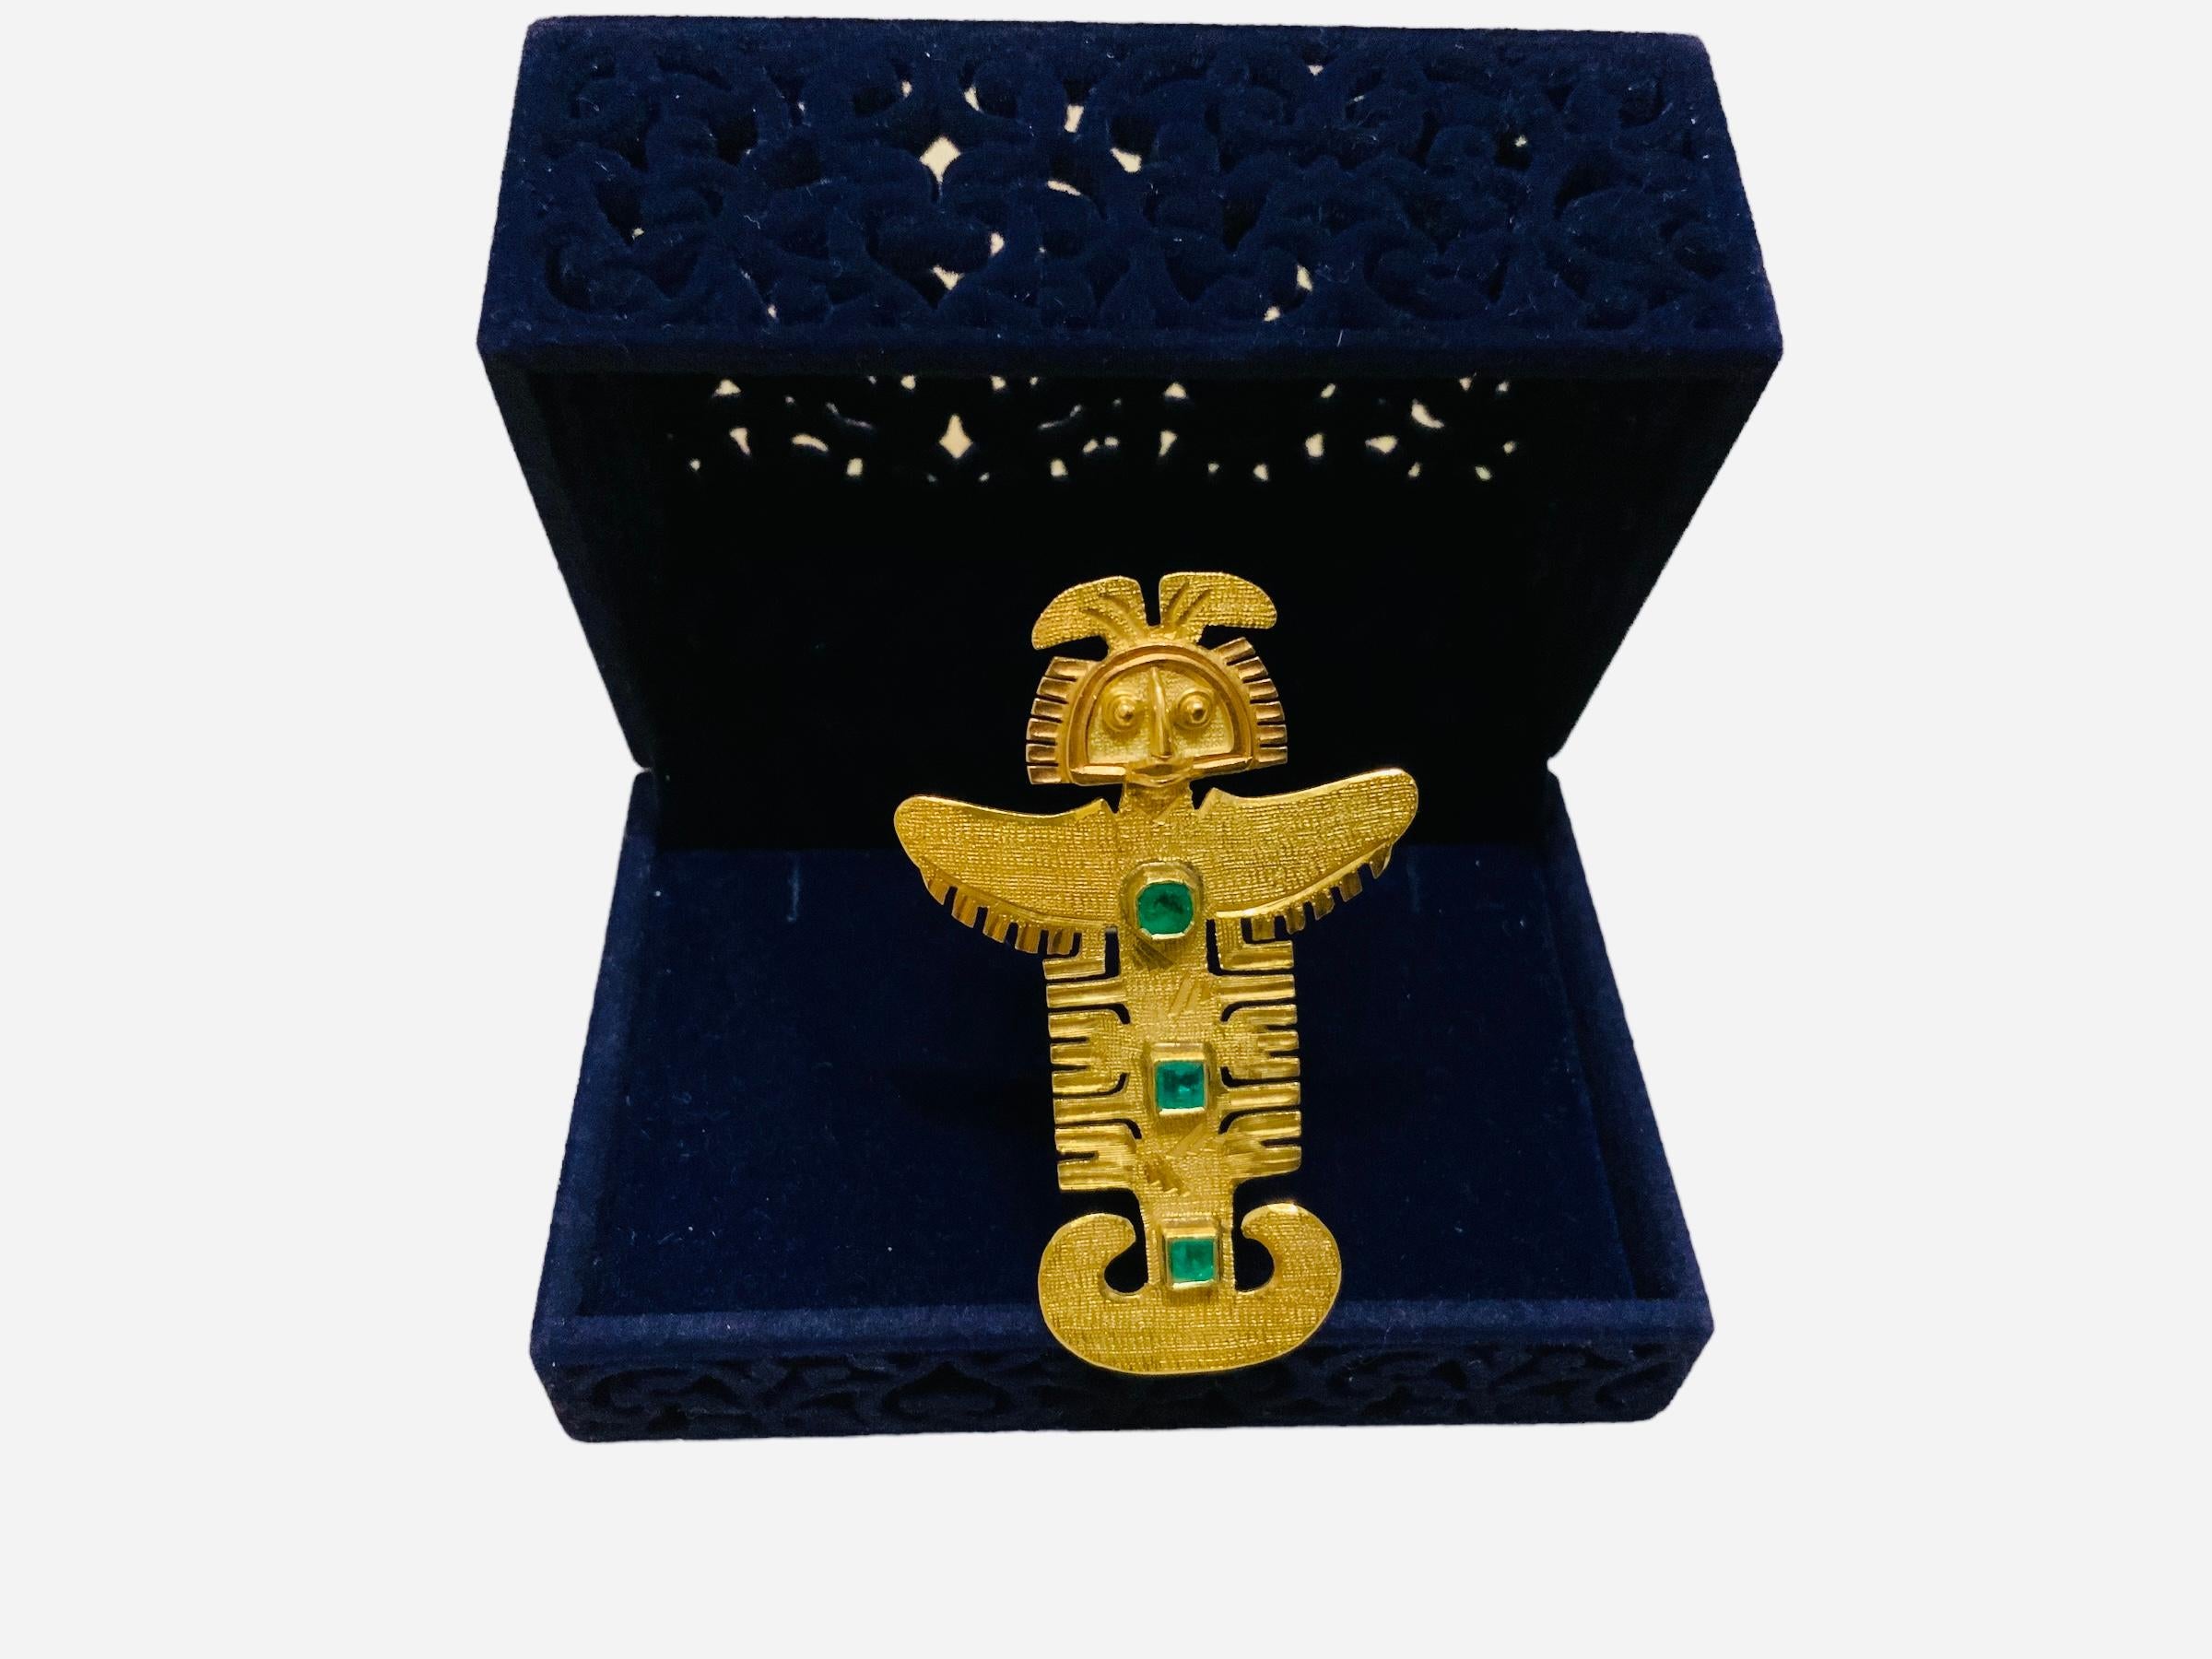 This is an 18K Yellow gold and Emerald hand crafted Pre-Columbian large brooch/pendant. It depicts a Central America Native God adorned in the center with a column of three square emeralds that measure 3mm each one. Its weight is 8.7 dwt. It is